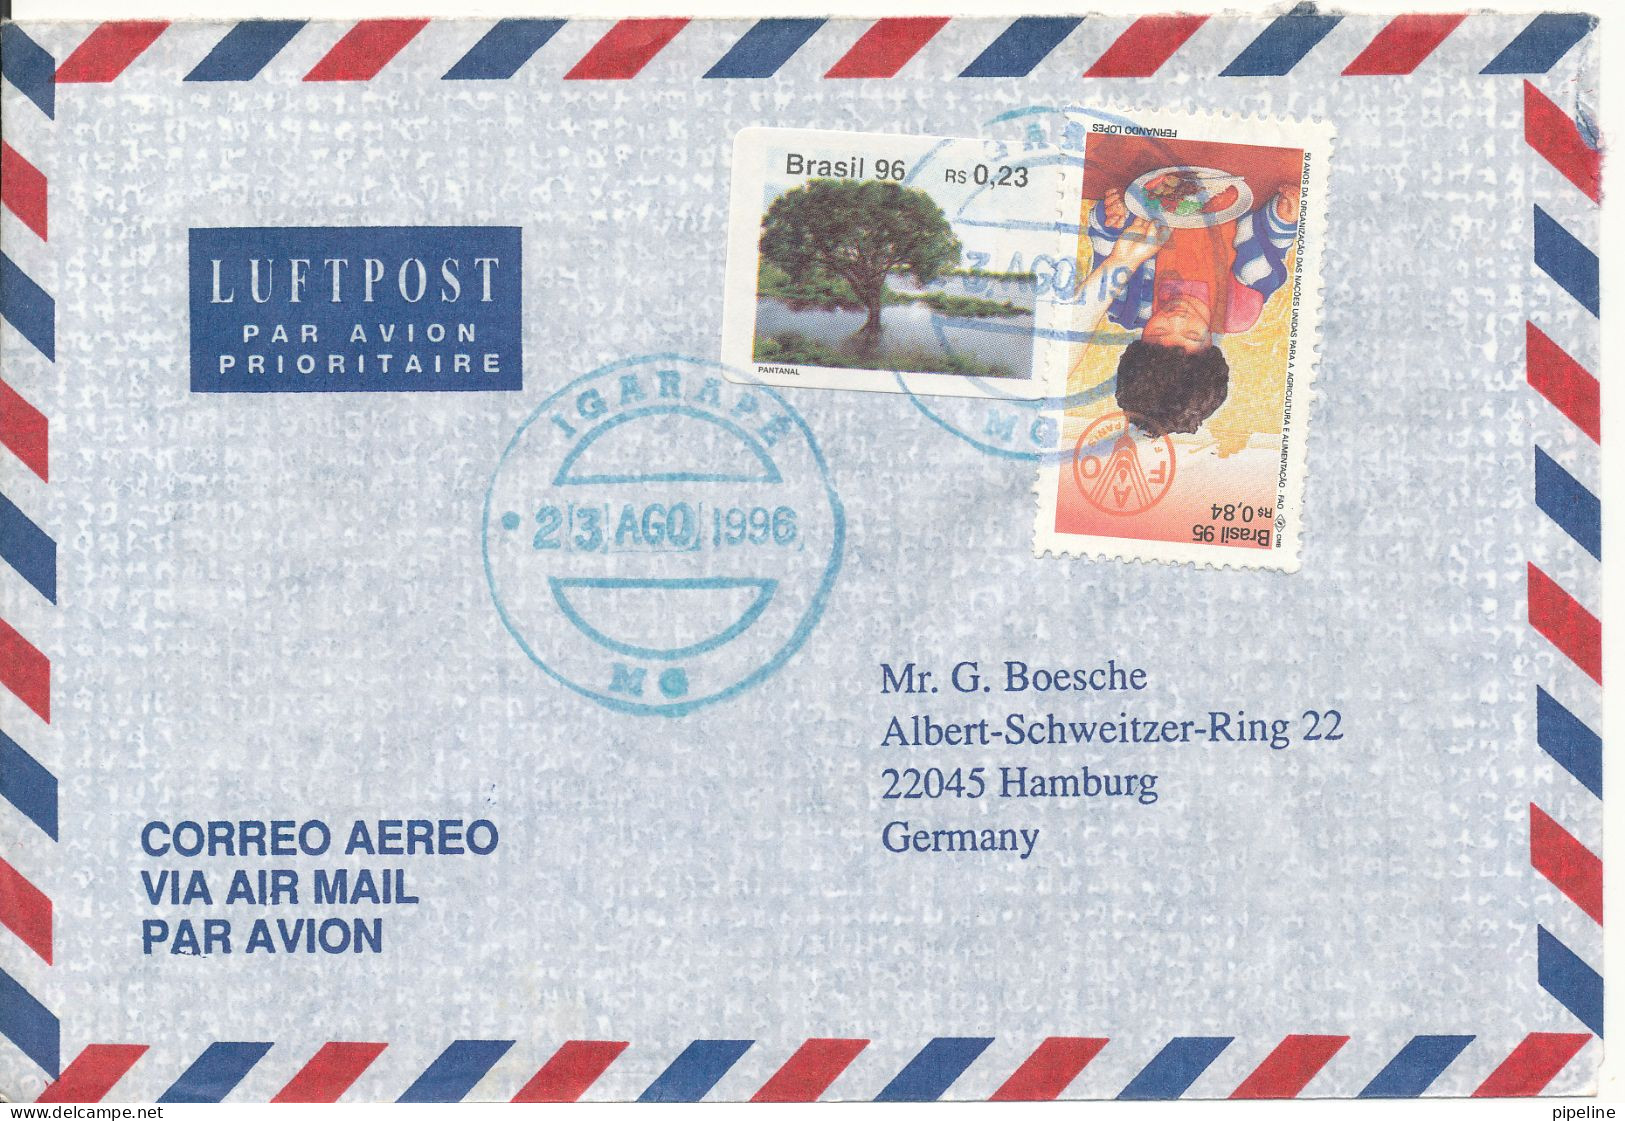 Brazil Air Mail Cover Sent To Germany 23-10-1996 Topic Stamps - Airmail